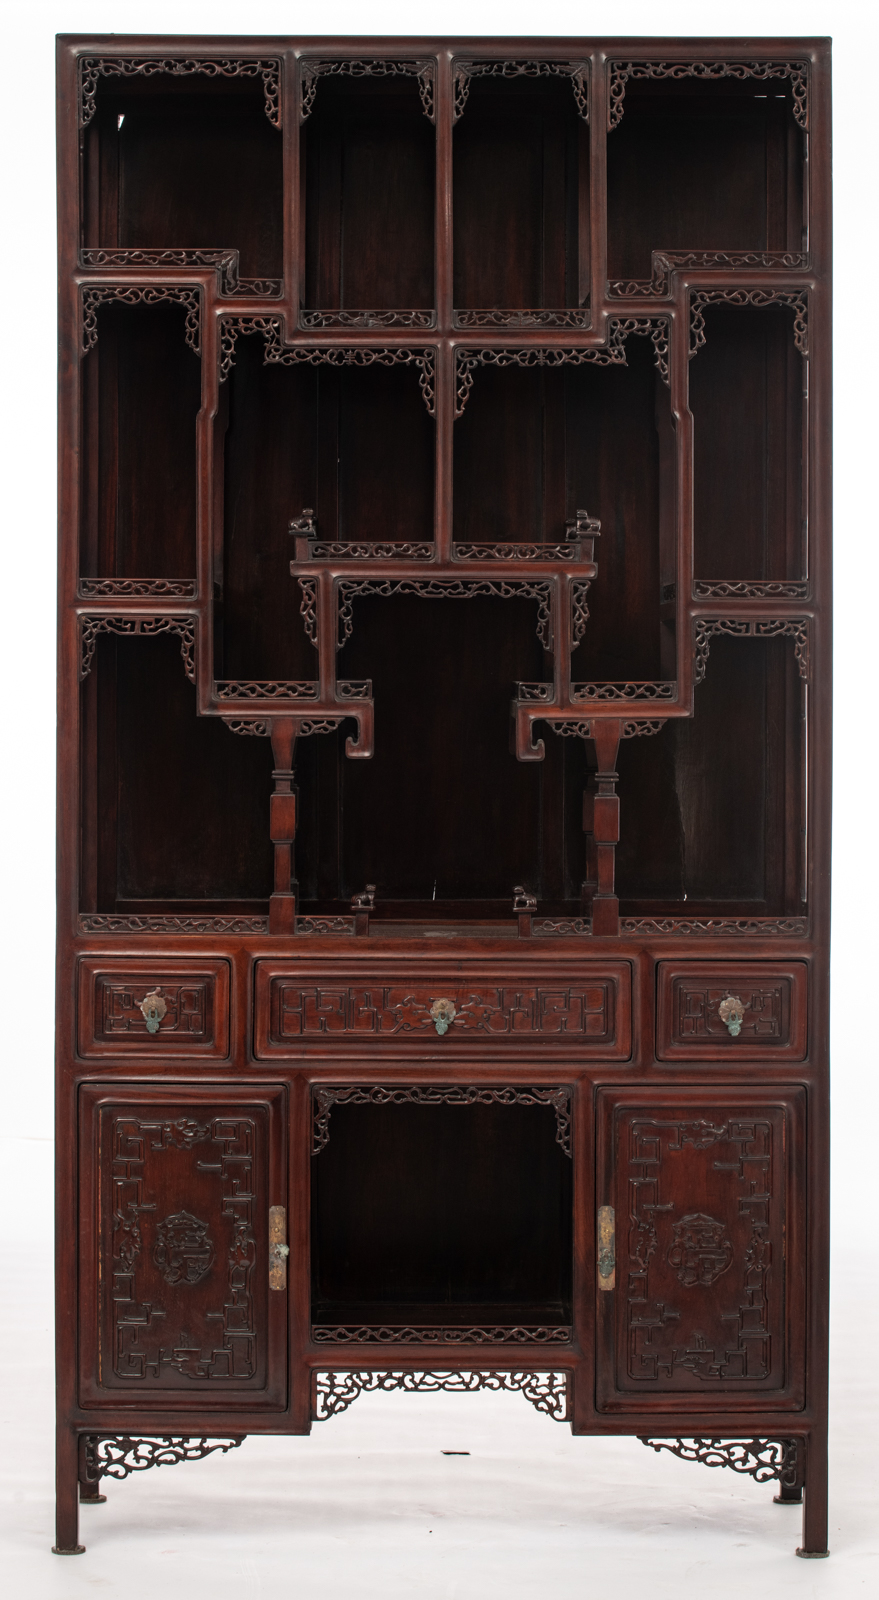 A fine Chinese rosewood display cabinet, decorated with richly carved openwork bandings and brass mo - Image 2 of 5